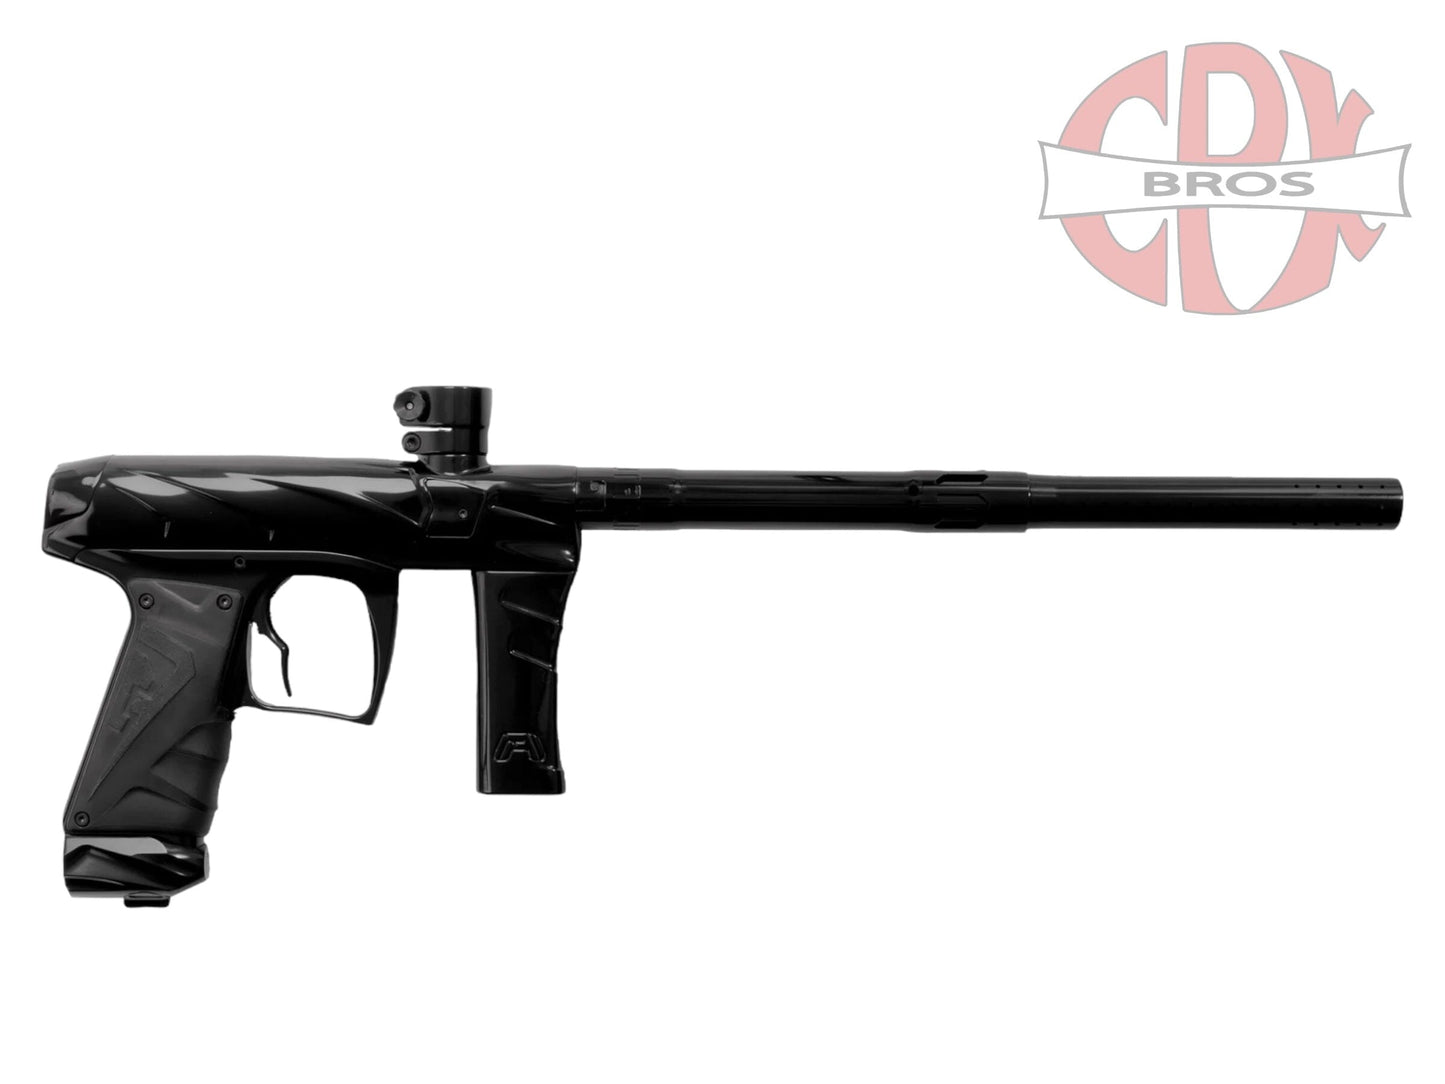 Used PRE-ORDER Field One Force V2 Paintball Gun - Gloss Black Paintball Gun from CPXBrosPaintball Buy/Sell/Trade Paintball Markers, New Paintball Guns, Paintball Hoppers, Paintball Masks, and Hormesis Headbands